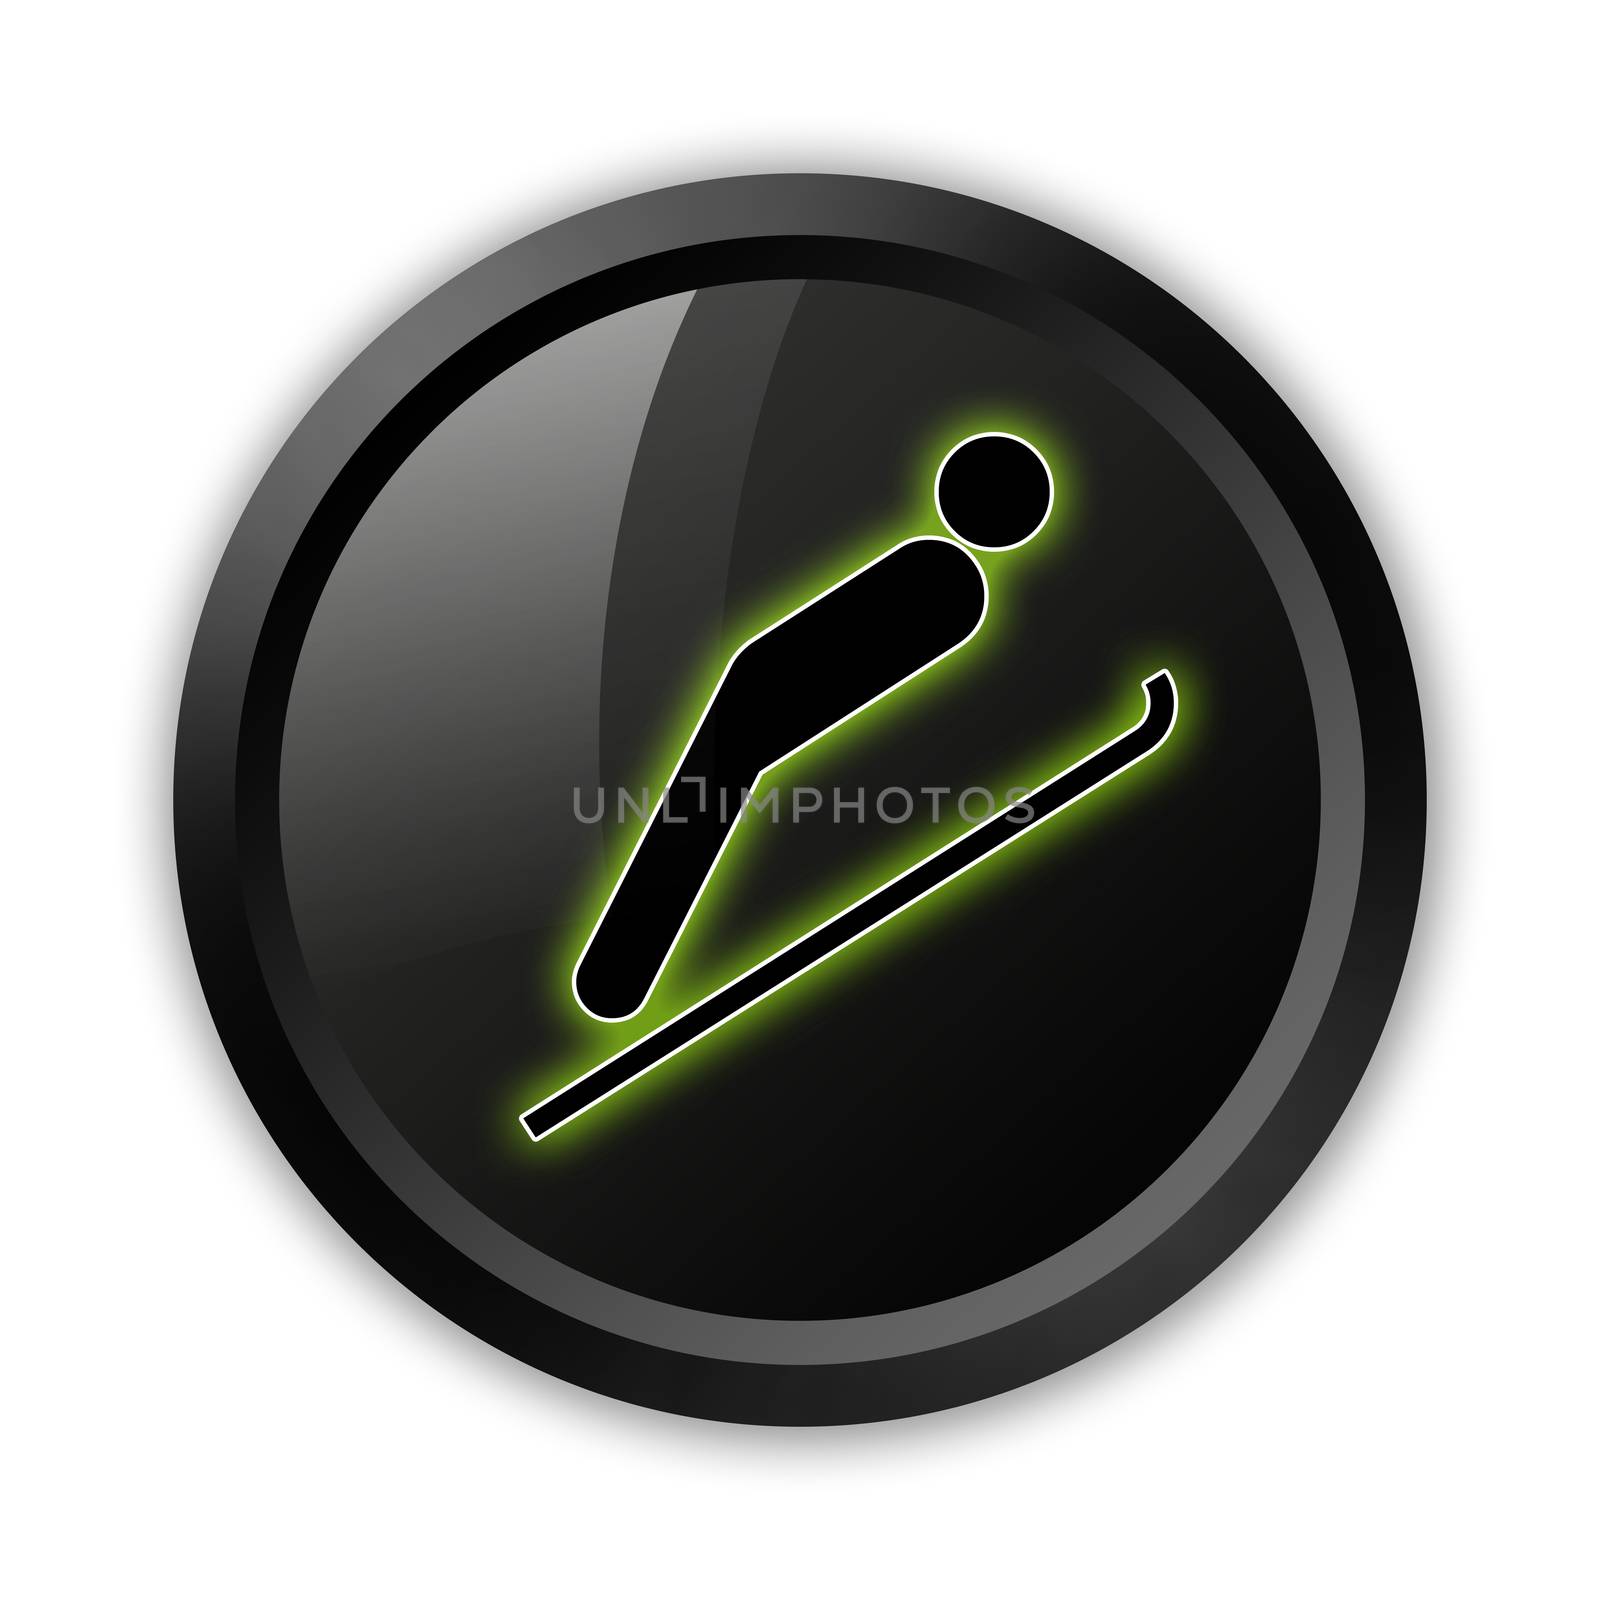 Icon, Button, Pictogram Ski Jumping by mindscanner